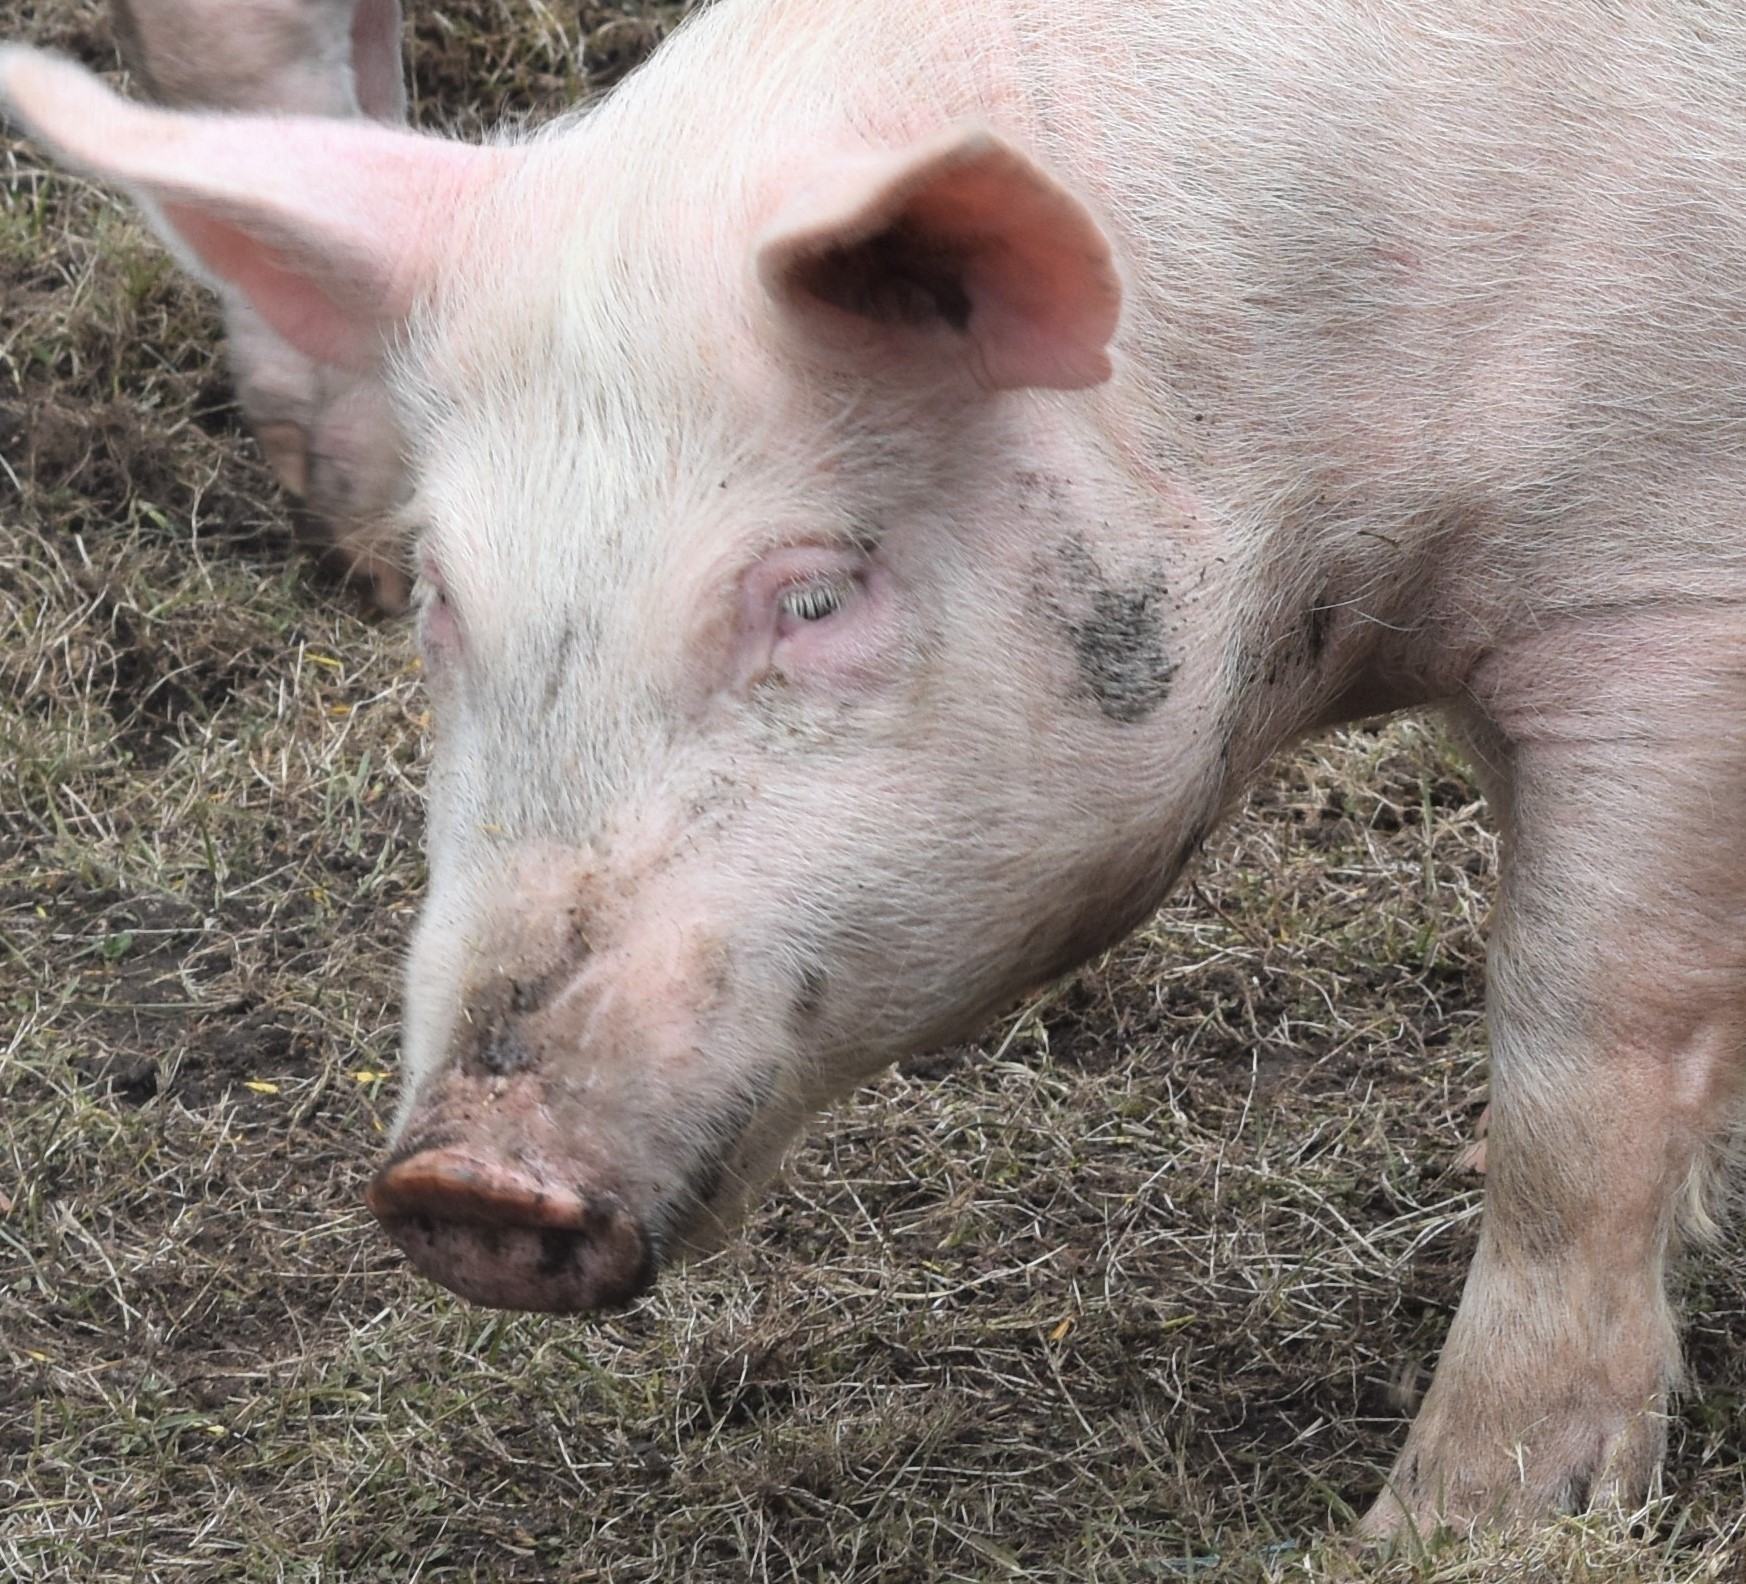 Cows understand 'Cow', Pigs understand 'Pig' - May Safely Graze